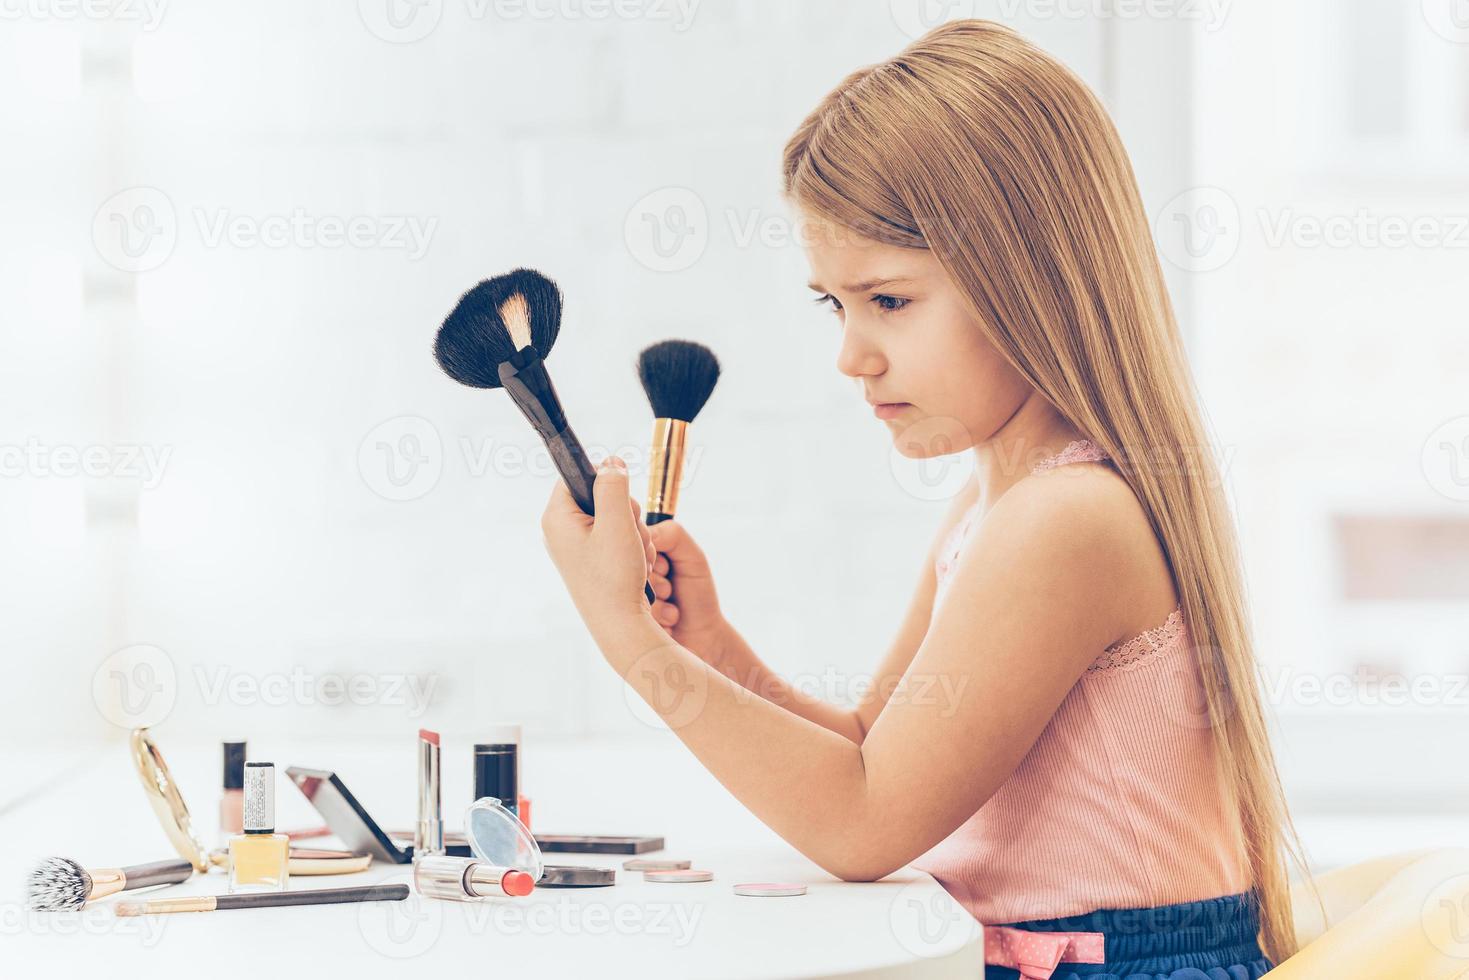 Is this brush for contouring Side view of pensivelittle girl choosing one of two make-up brushes while sitting at the dressing table photo